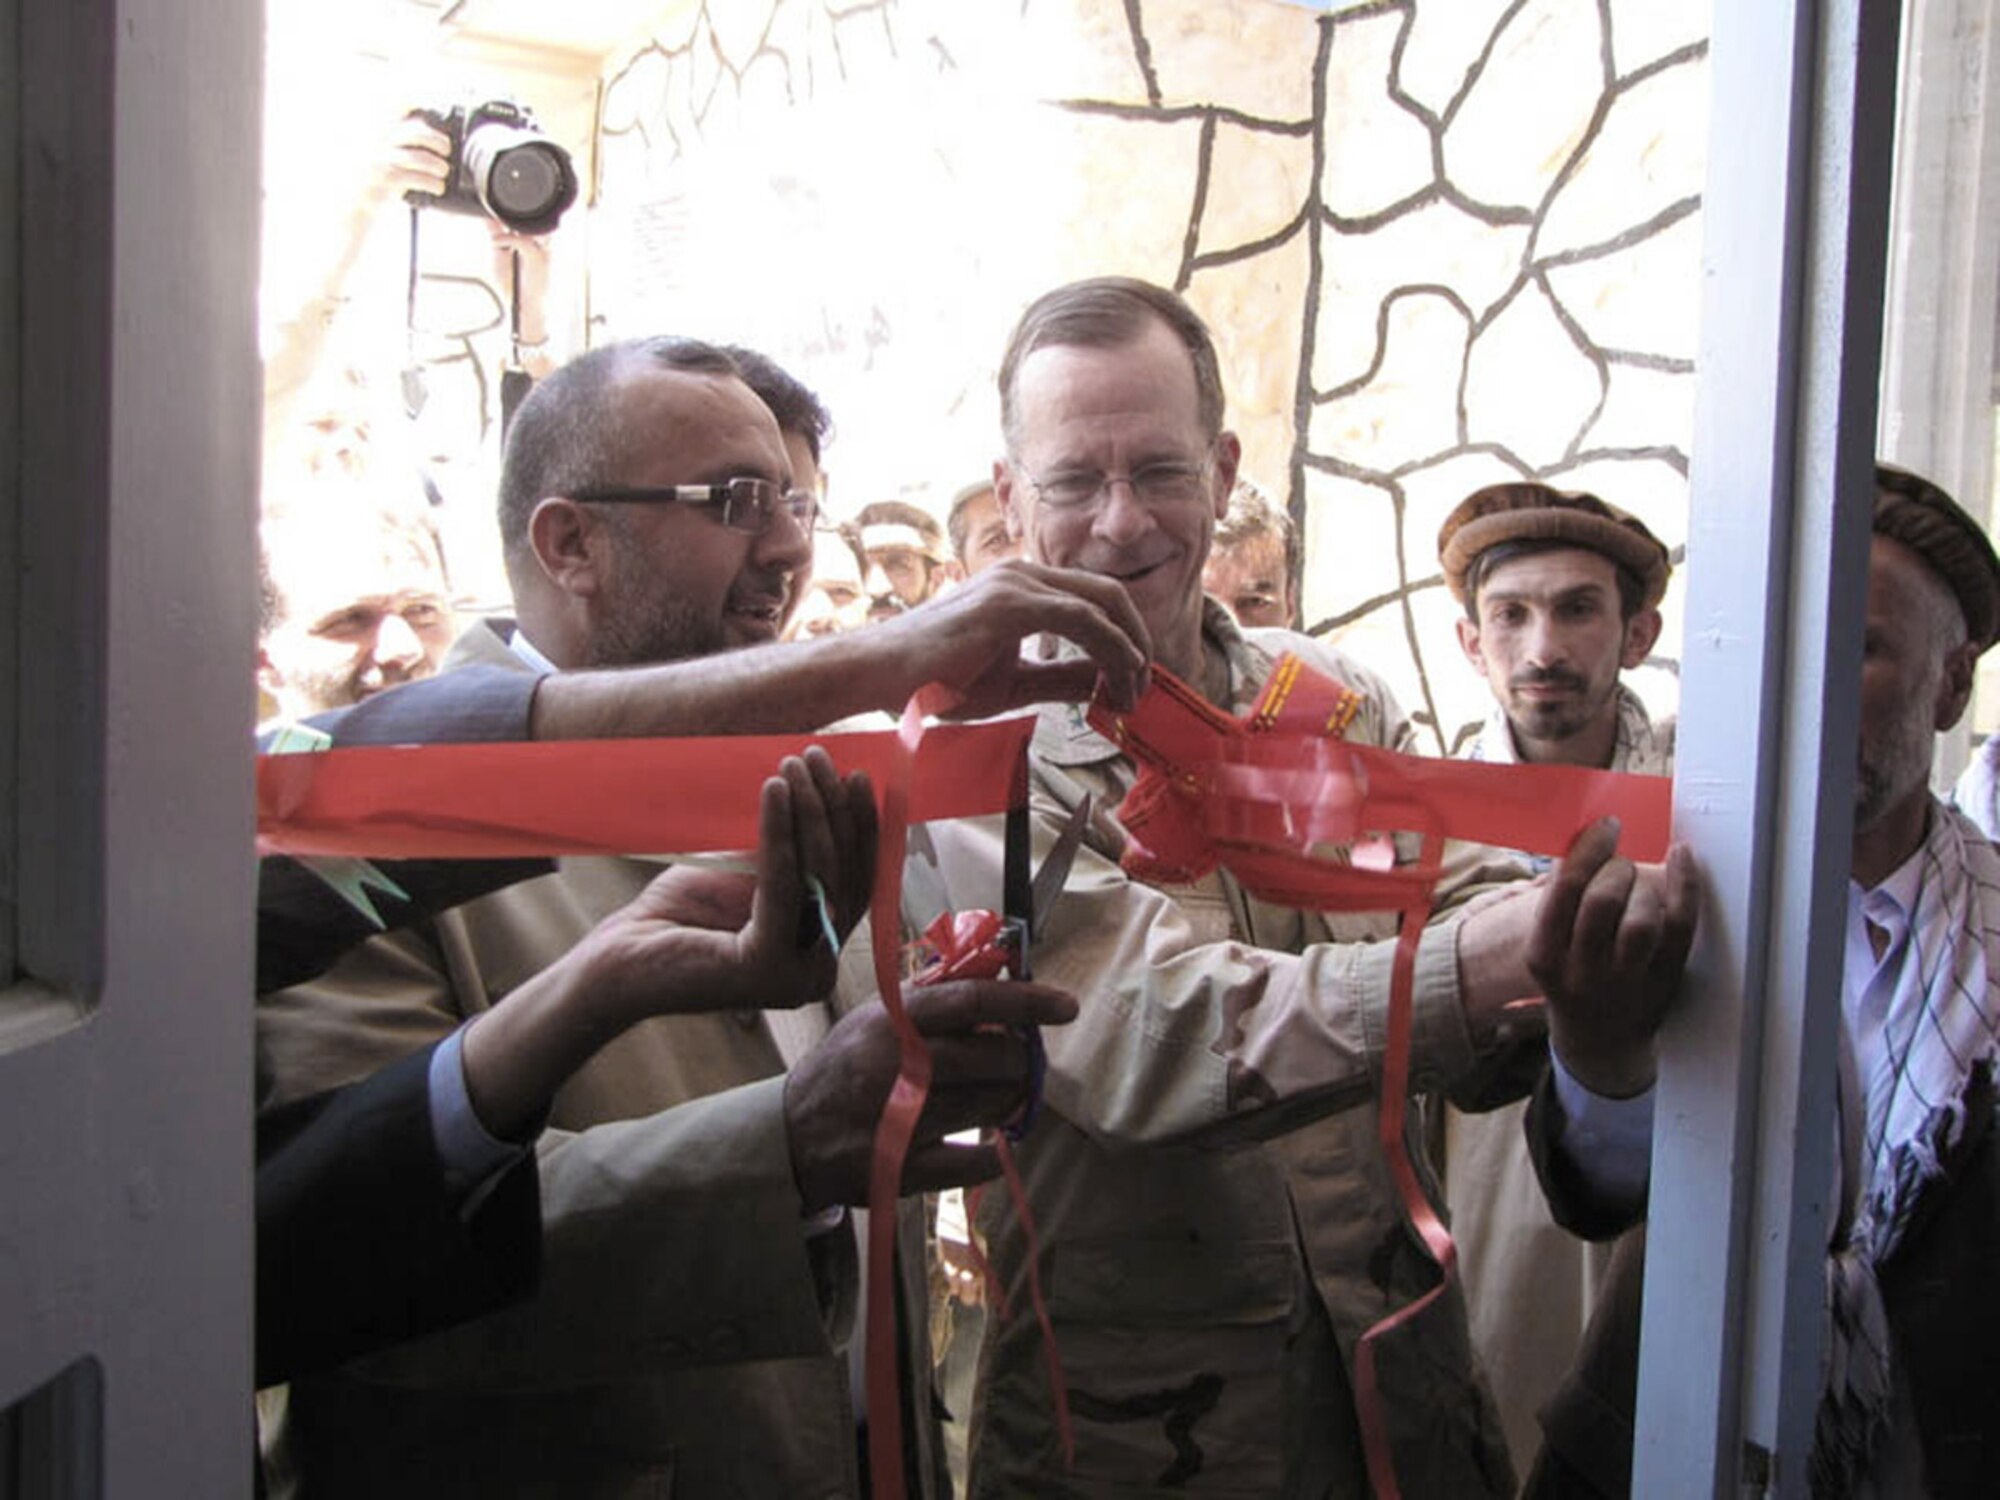 Panjshir Governor Haji Bahlol (left) and Navy Adm. Mike Mullen, chairman of the Joint Chiefs of Staff, cut the ceremonial ribbon July 15 at the entrance to the new Peshgur School for Girls in the Khenj district of eastern Afghanistan's Panjshir province.  (U.S. Air Force photo/Capt. Stacie N. Shafran)